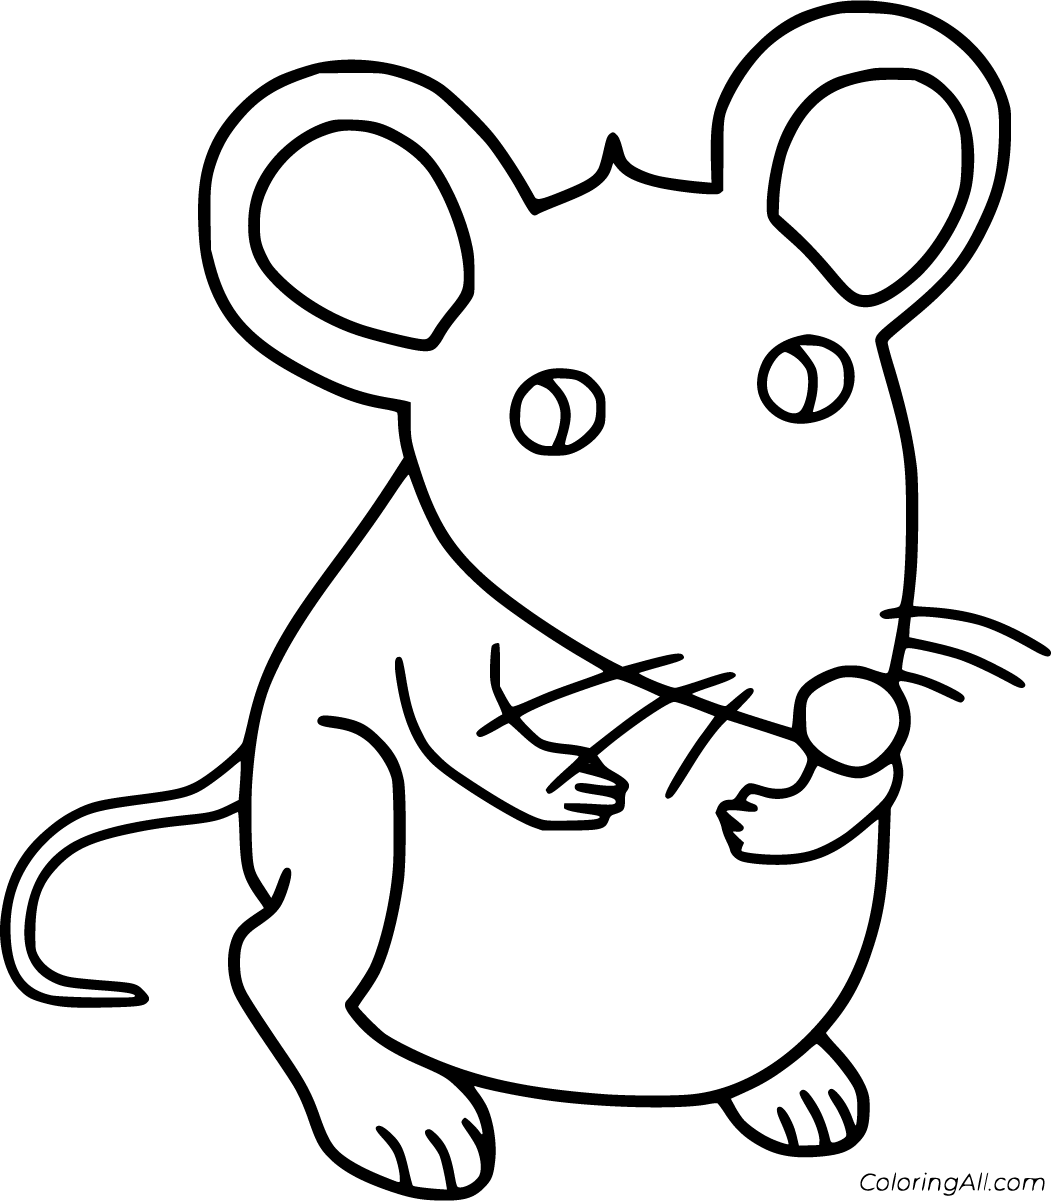 Mouse Coloring Pages - ColoringAll